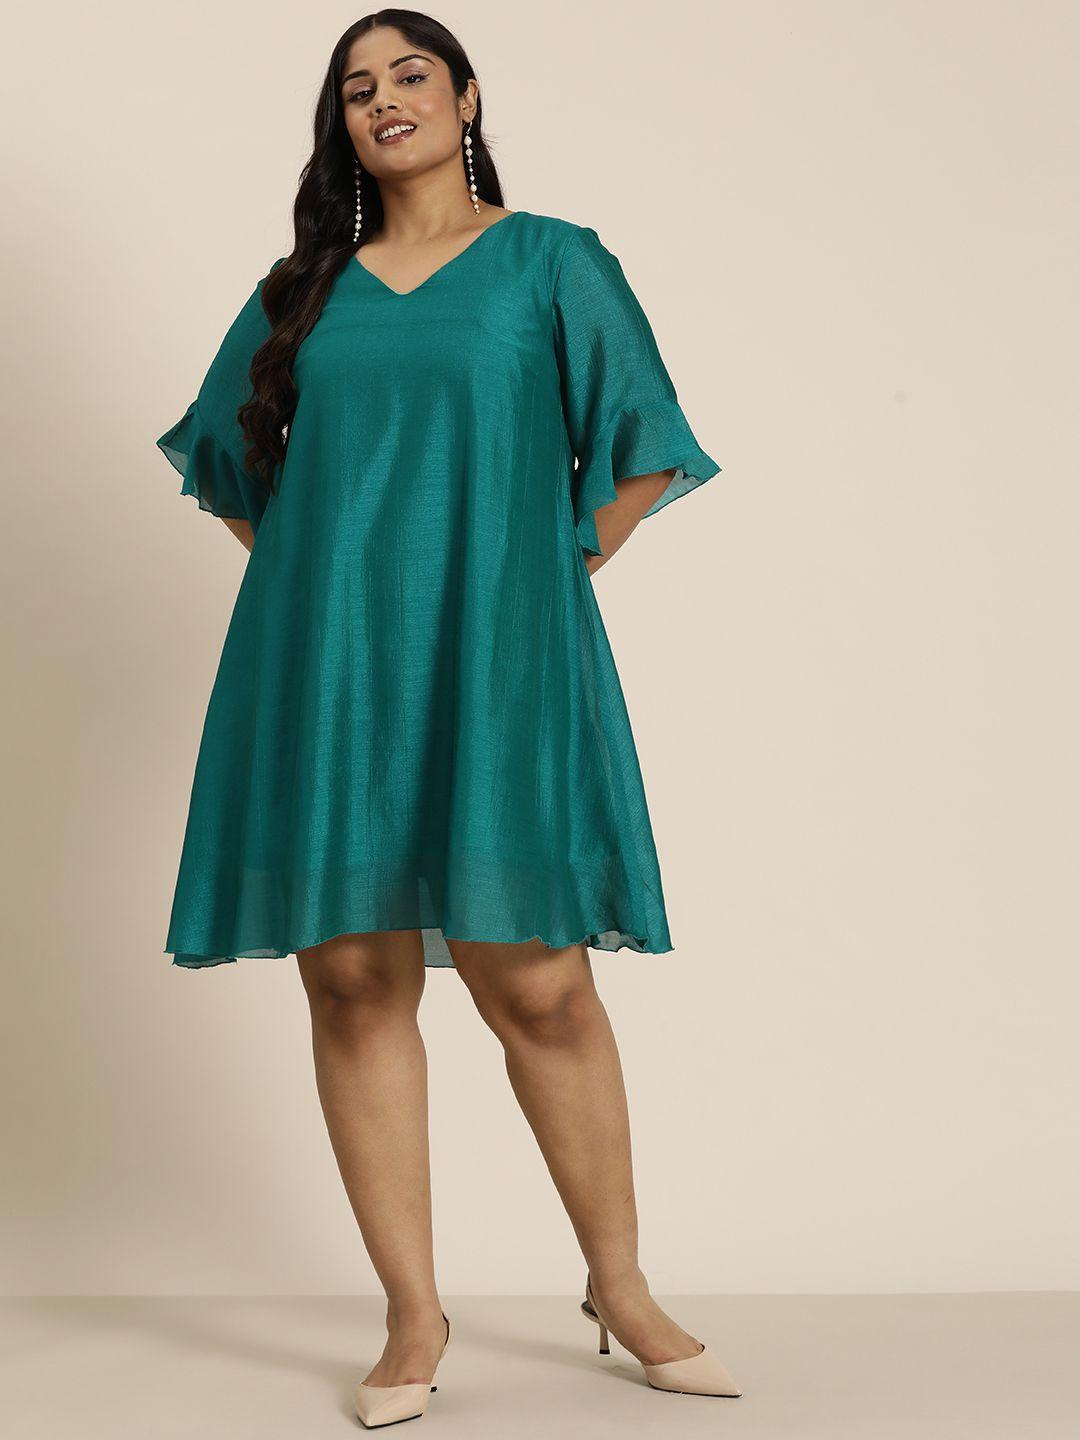 qurvii+-plus-size-bell-sleeves-a-line-dress